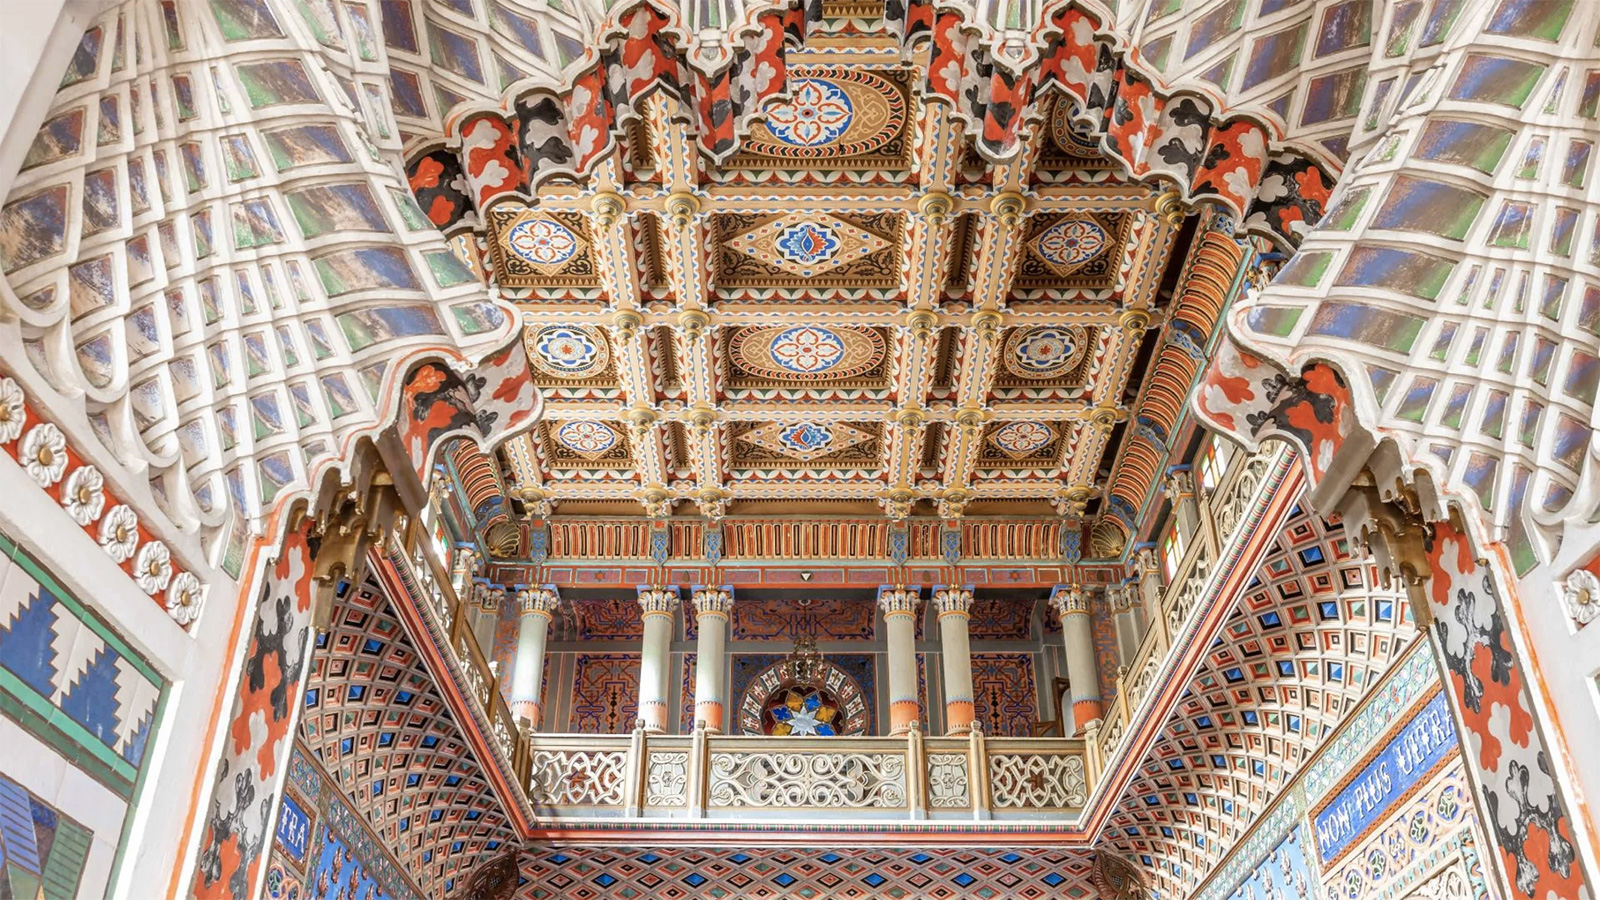 Kaleidoscopic Sammezzano Castle beloved by urban explorers lists for $18.3m in Tuscany